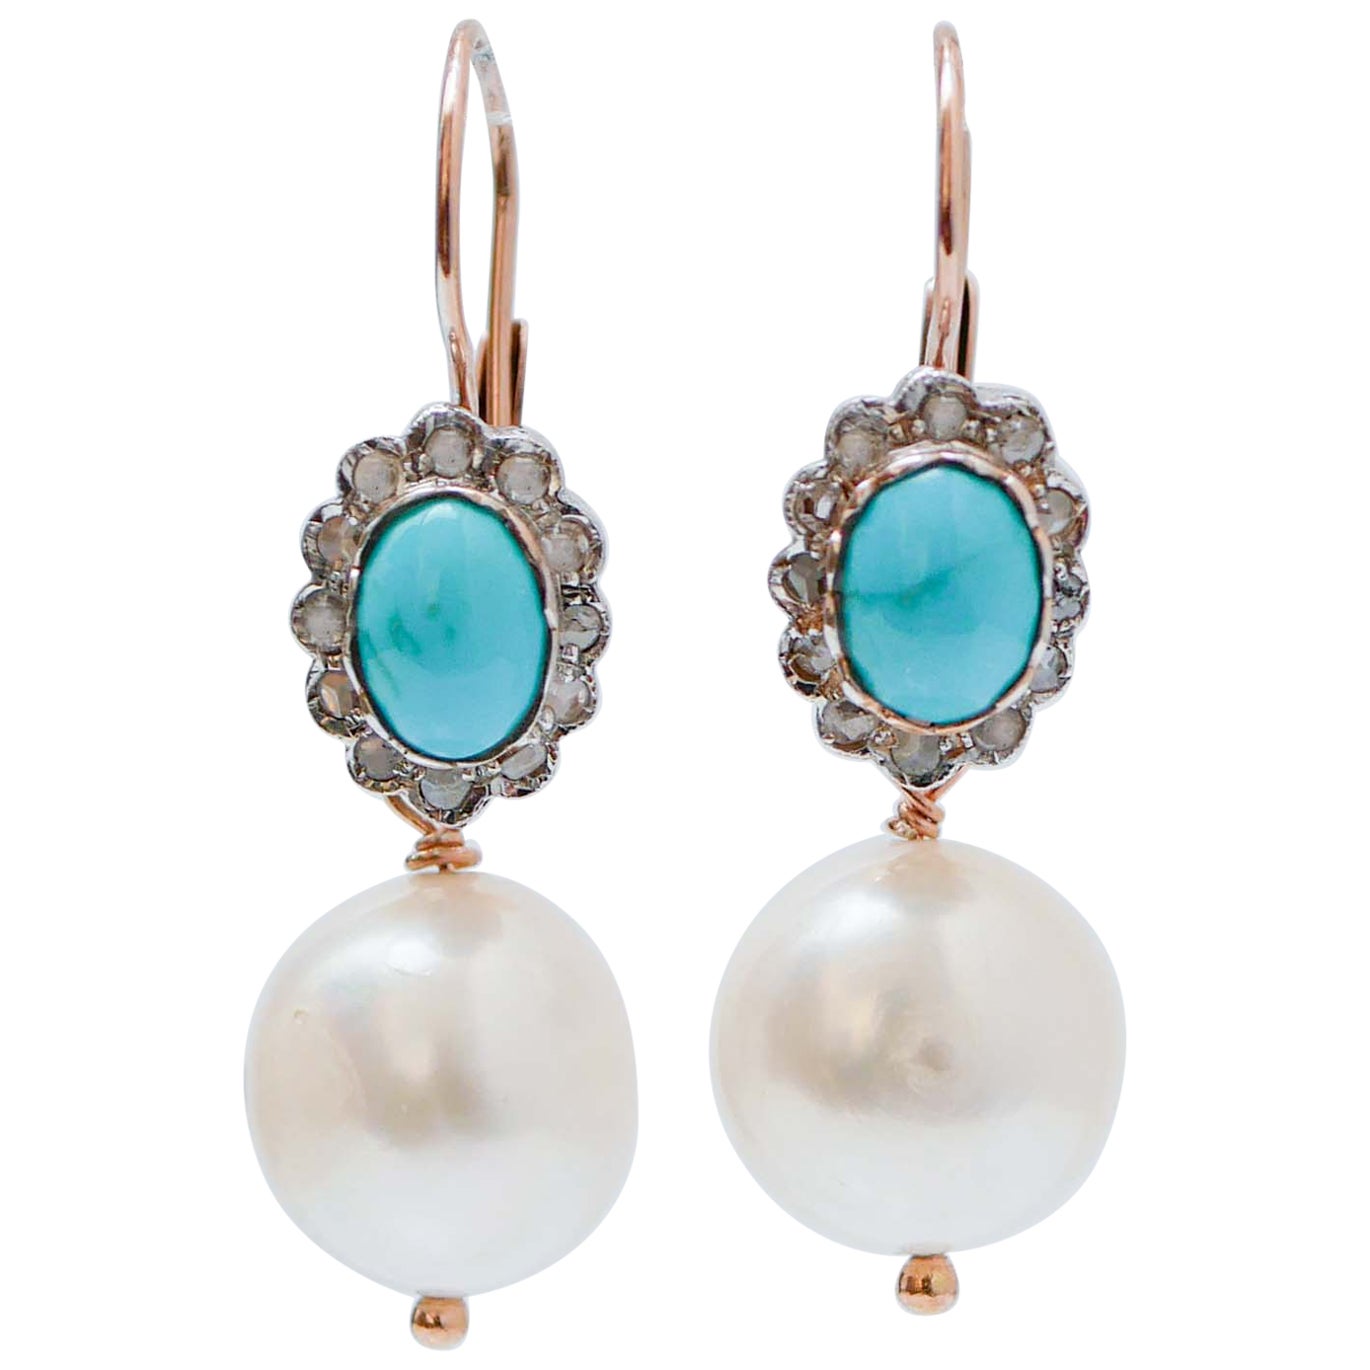 White Pearls, Turquoise, Diamonds, Rose Gold and Silver Dangle Earrings.